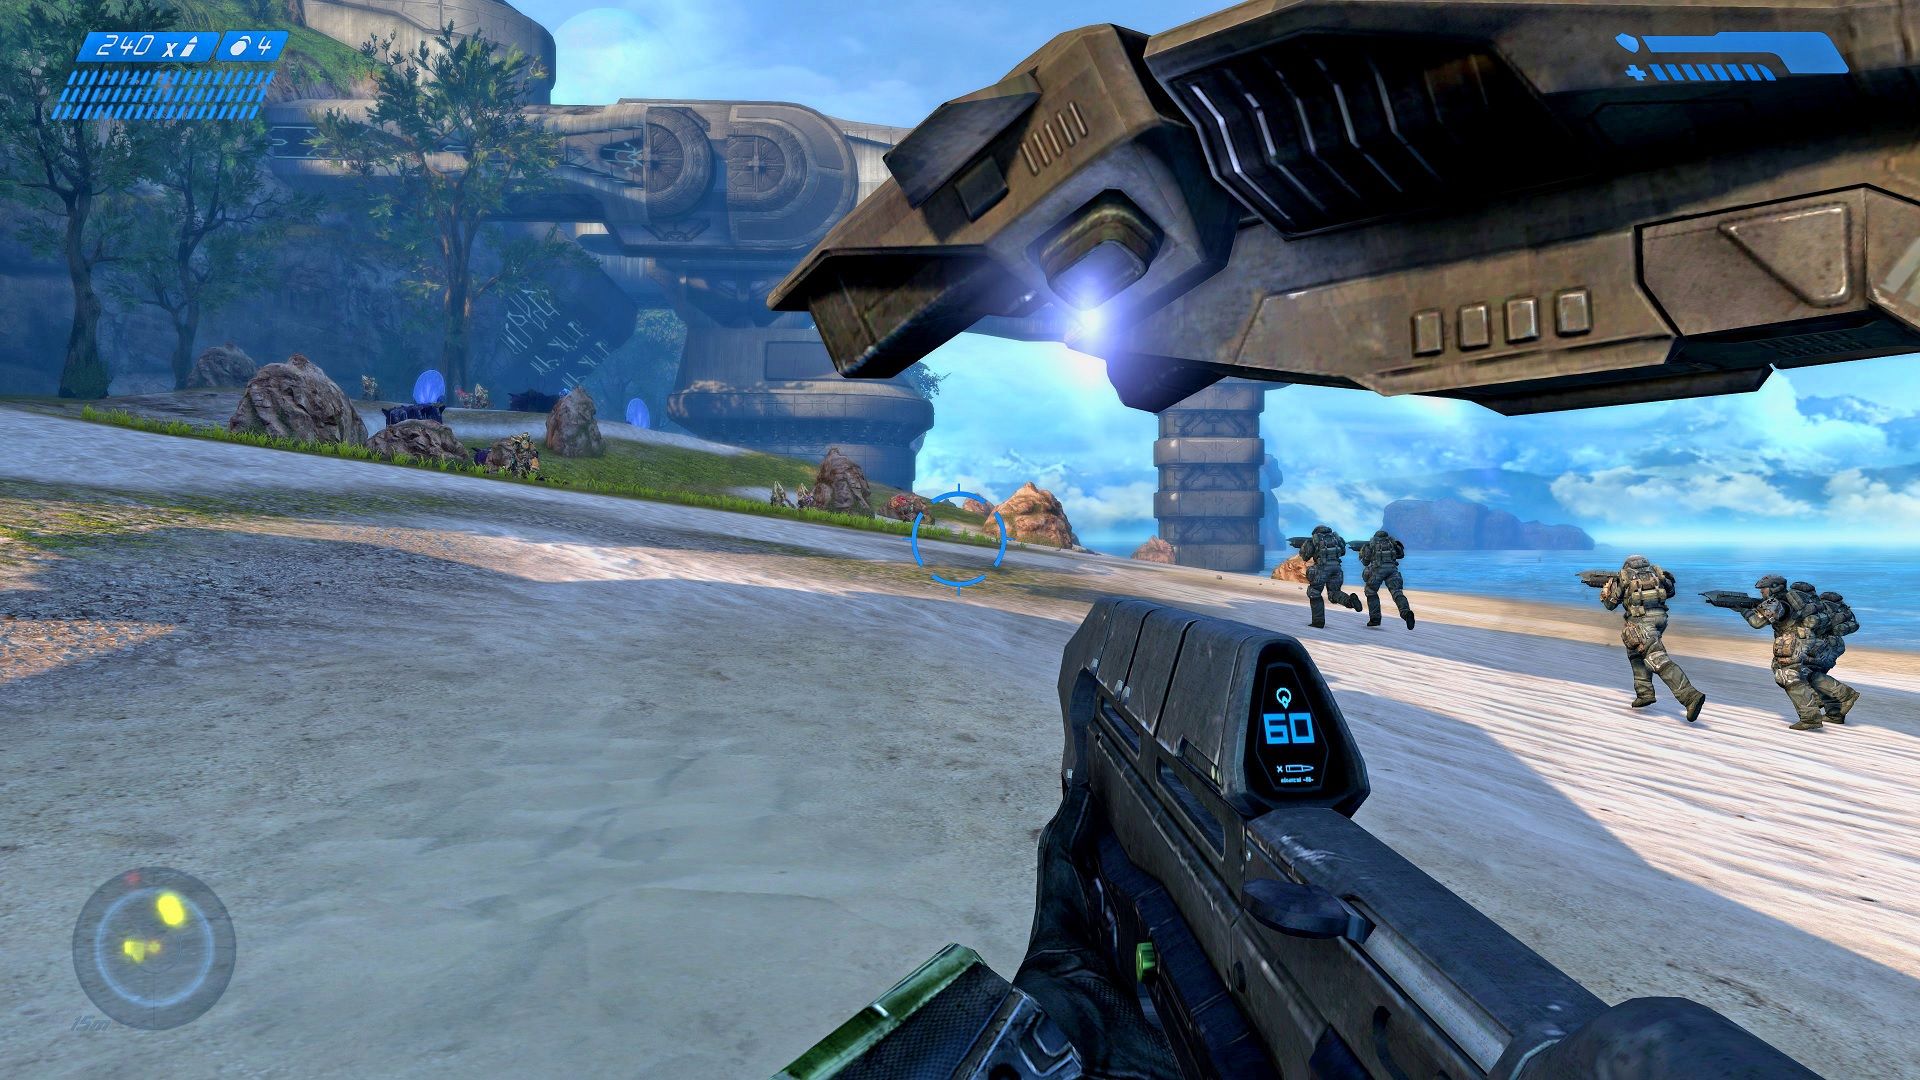 The original Halo has now been remastered for PC image 1